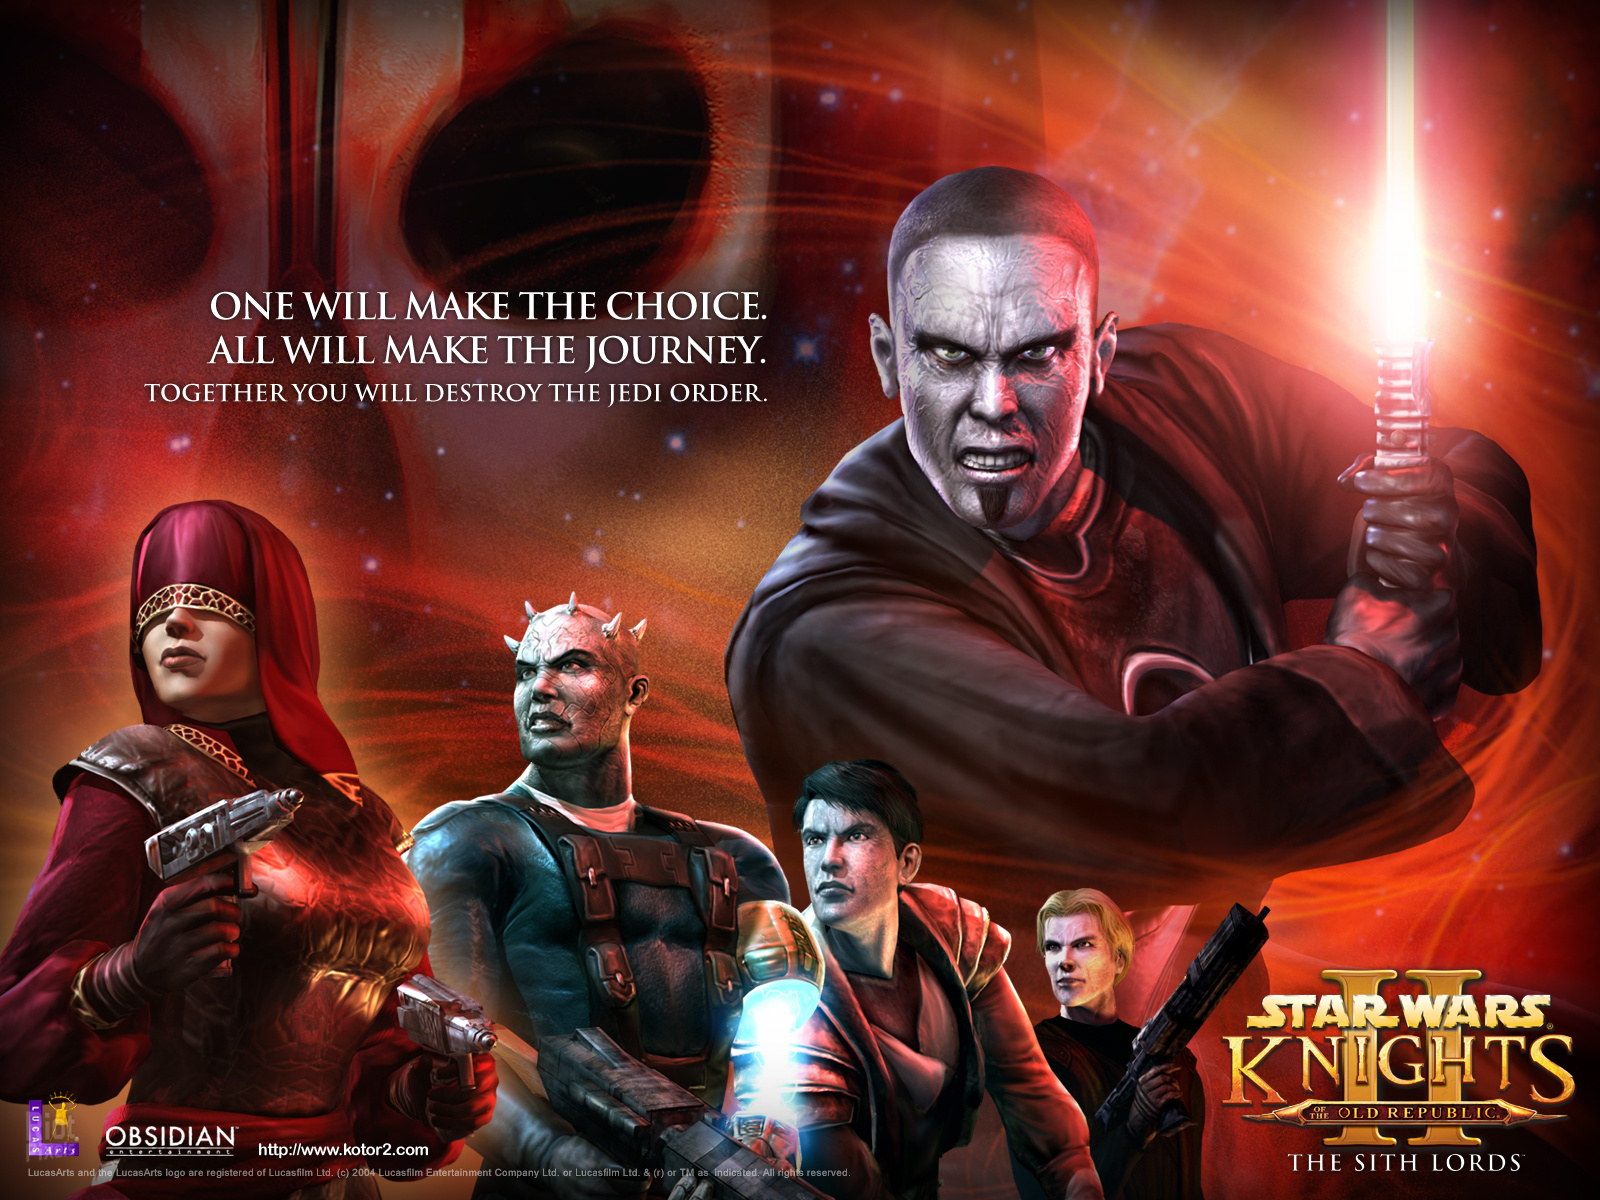 Star wars knights of the old republic русификатор steam фото 94